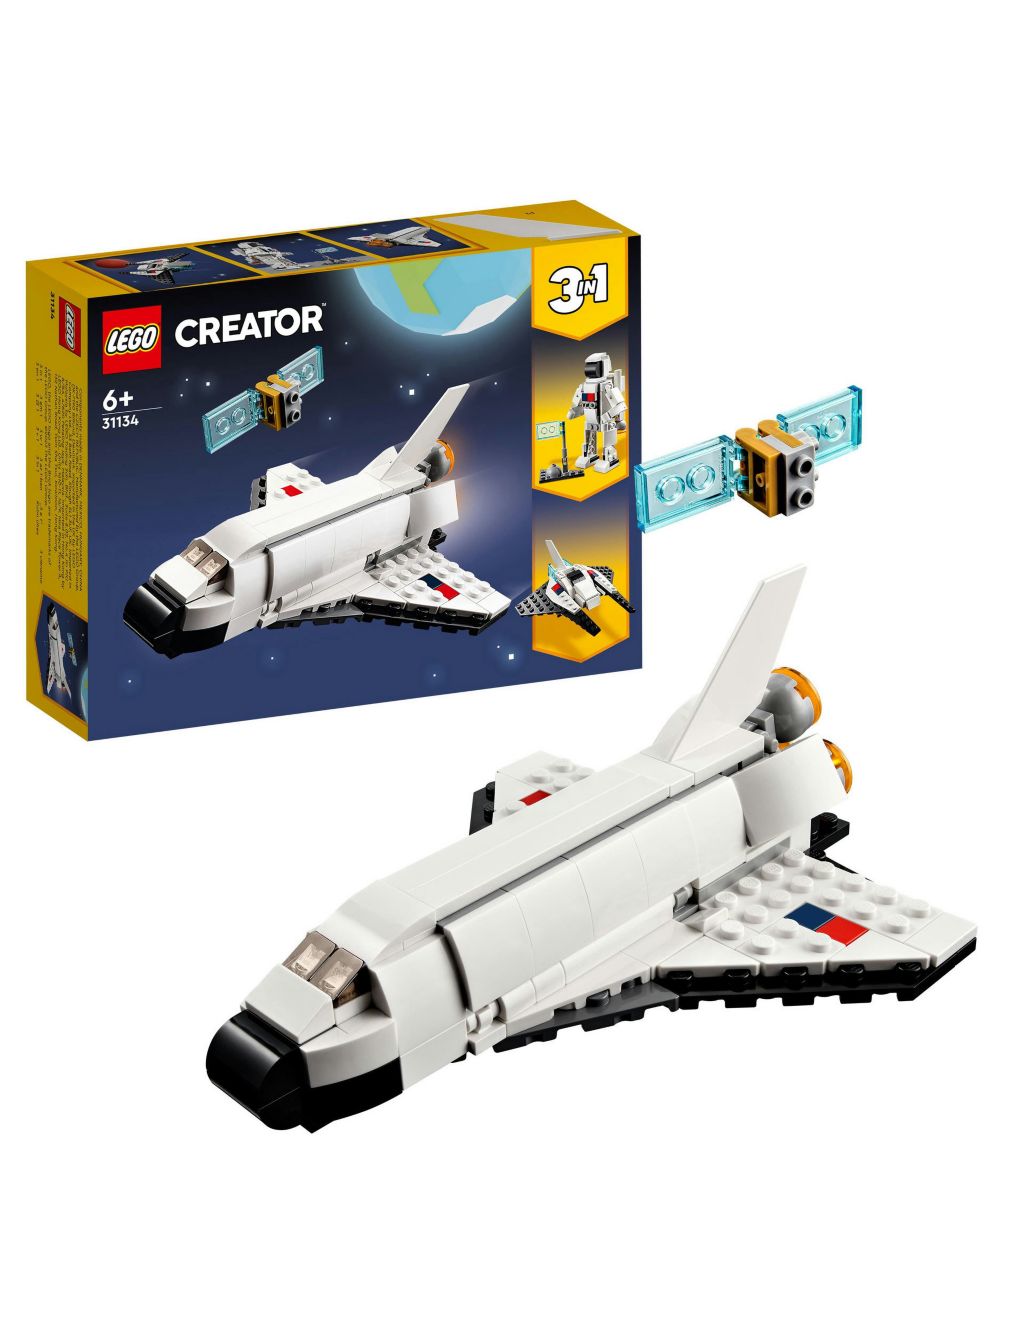 LEGO Creator 3 in 1 Space Shuttle Toy Set (6+ Yrs) image 1